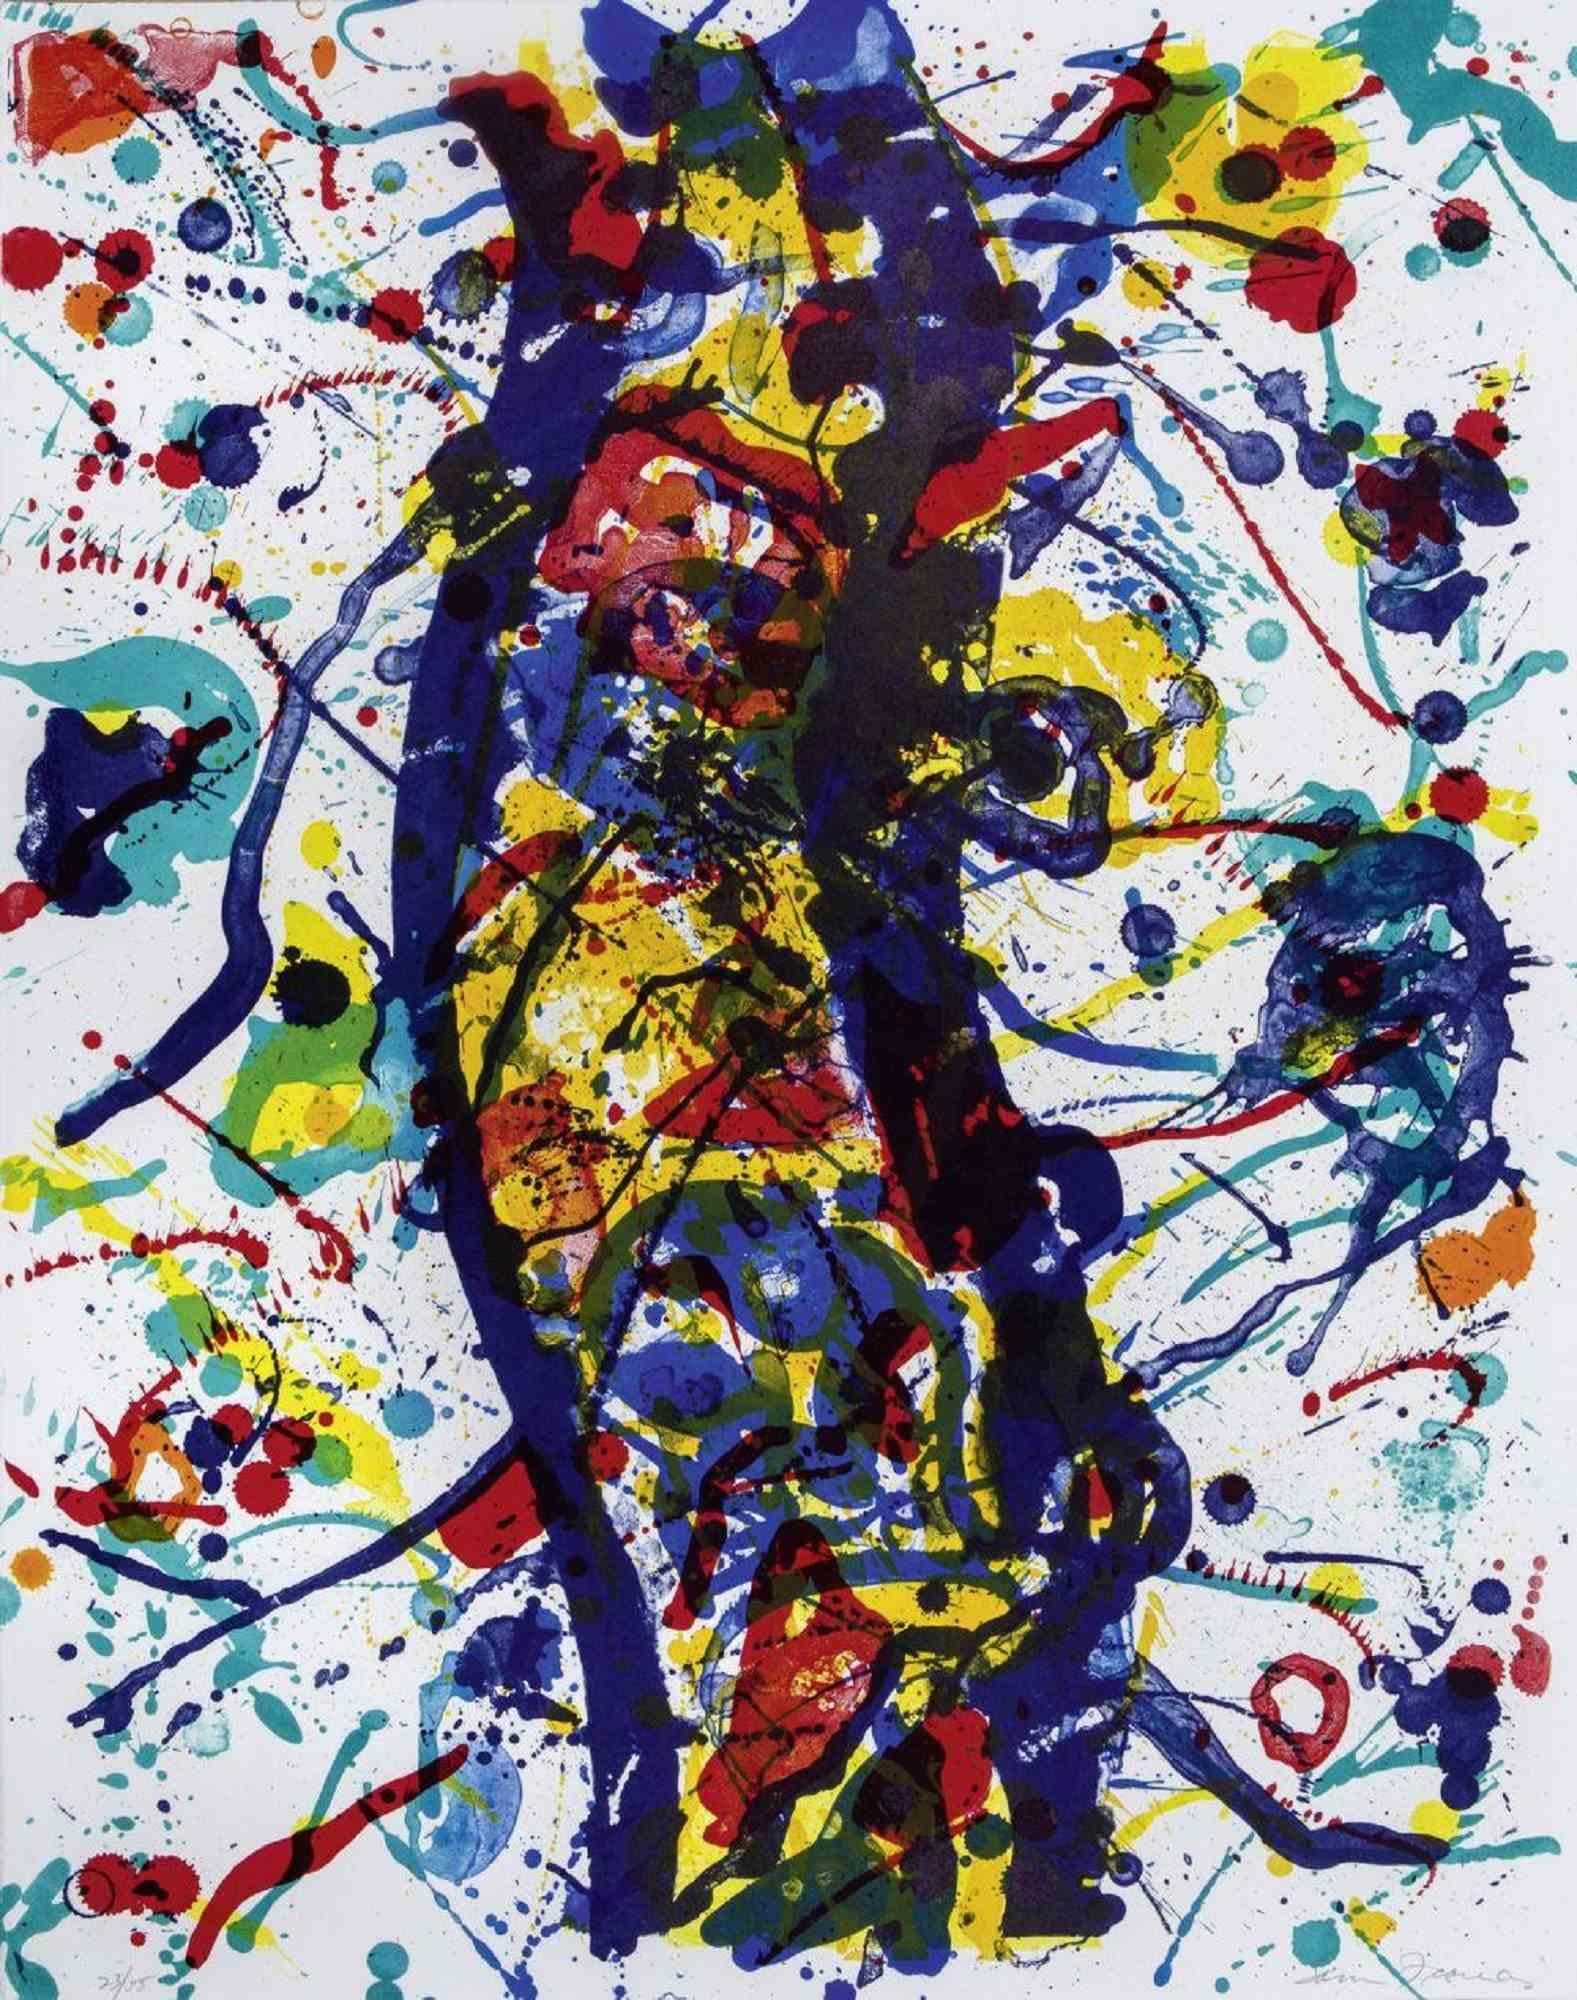 Untitled is an original contemporary artwork realized by Sam Francis in 1986

Lithograph on BFK Rives.

Hand signed on the lower right margin.

Numbered on the lower left margin.

Edition of 23/55.

Dryp stamp of the Editor The Litho Shops Inc Santa